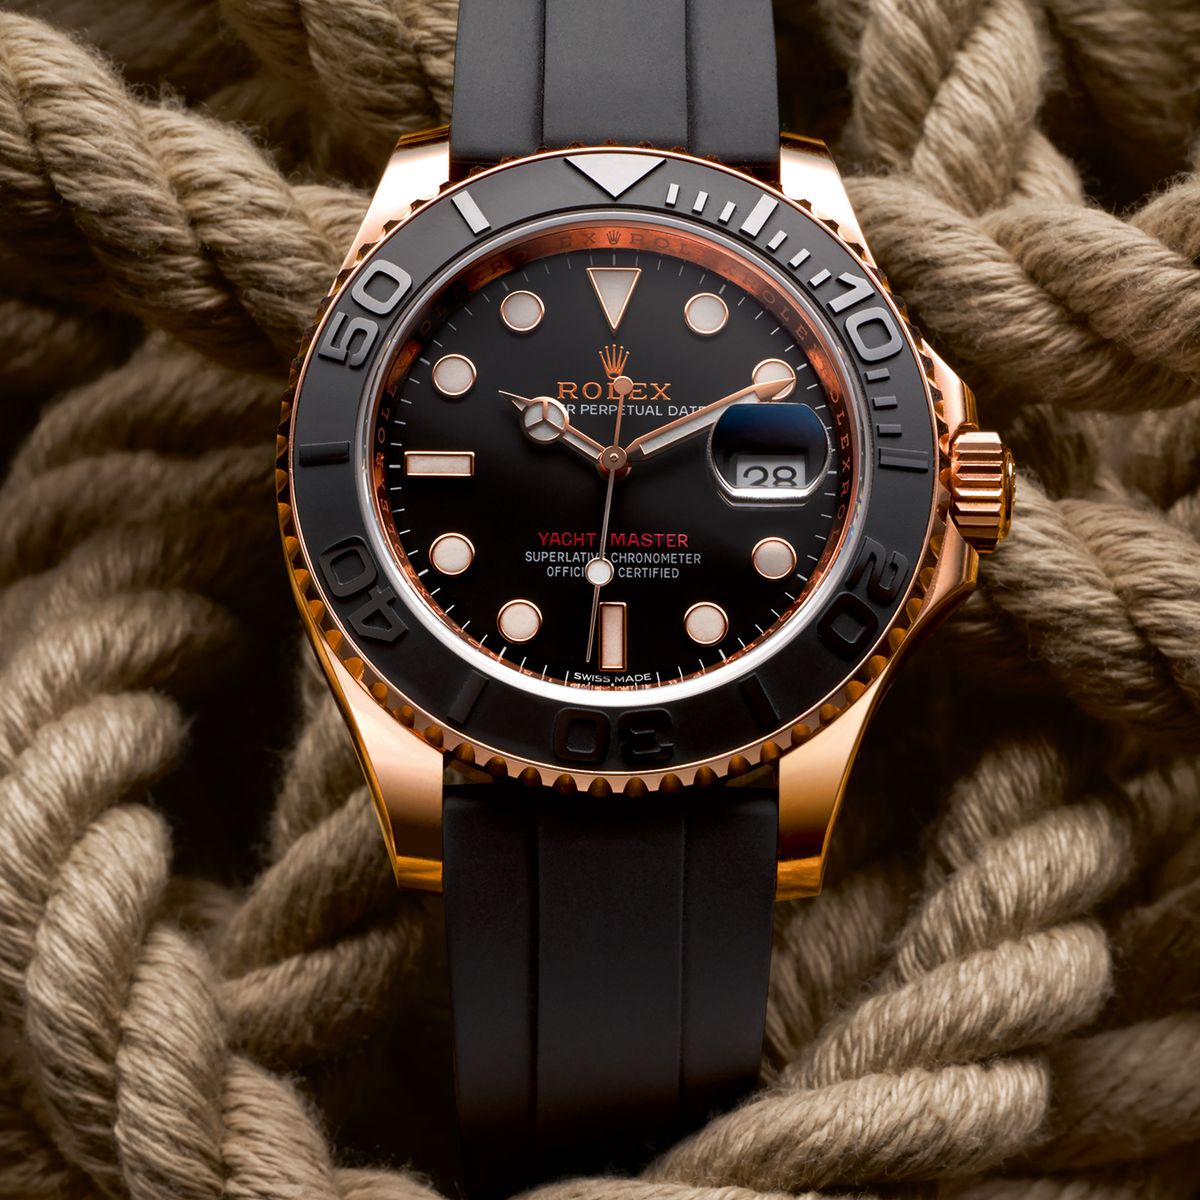 Rolex Yacht-Master 40: Is the 2015 design the most radical Rolex